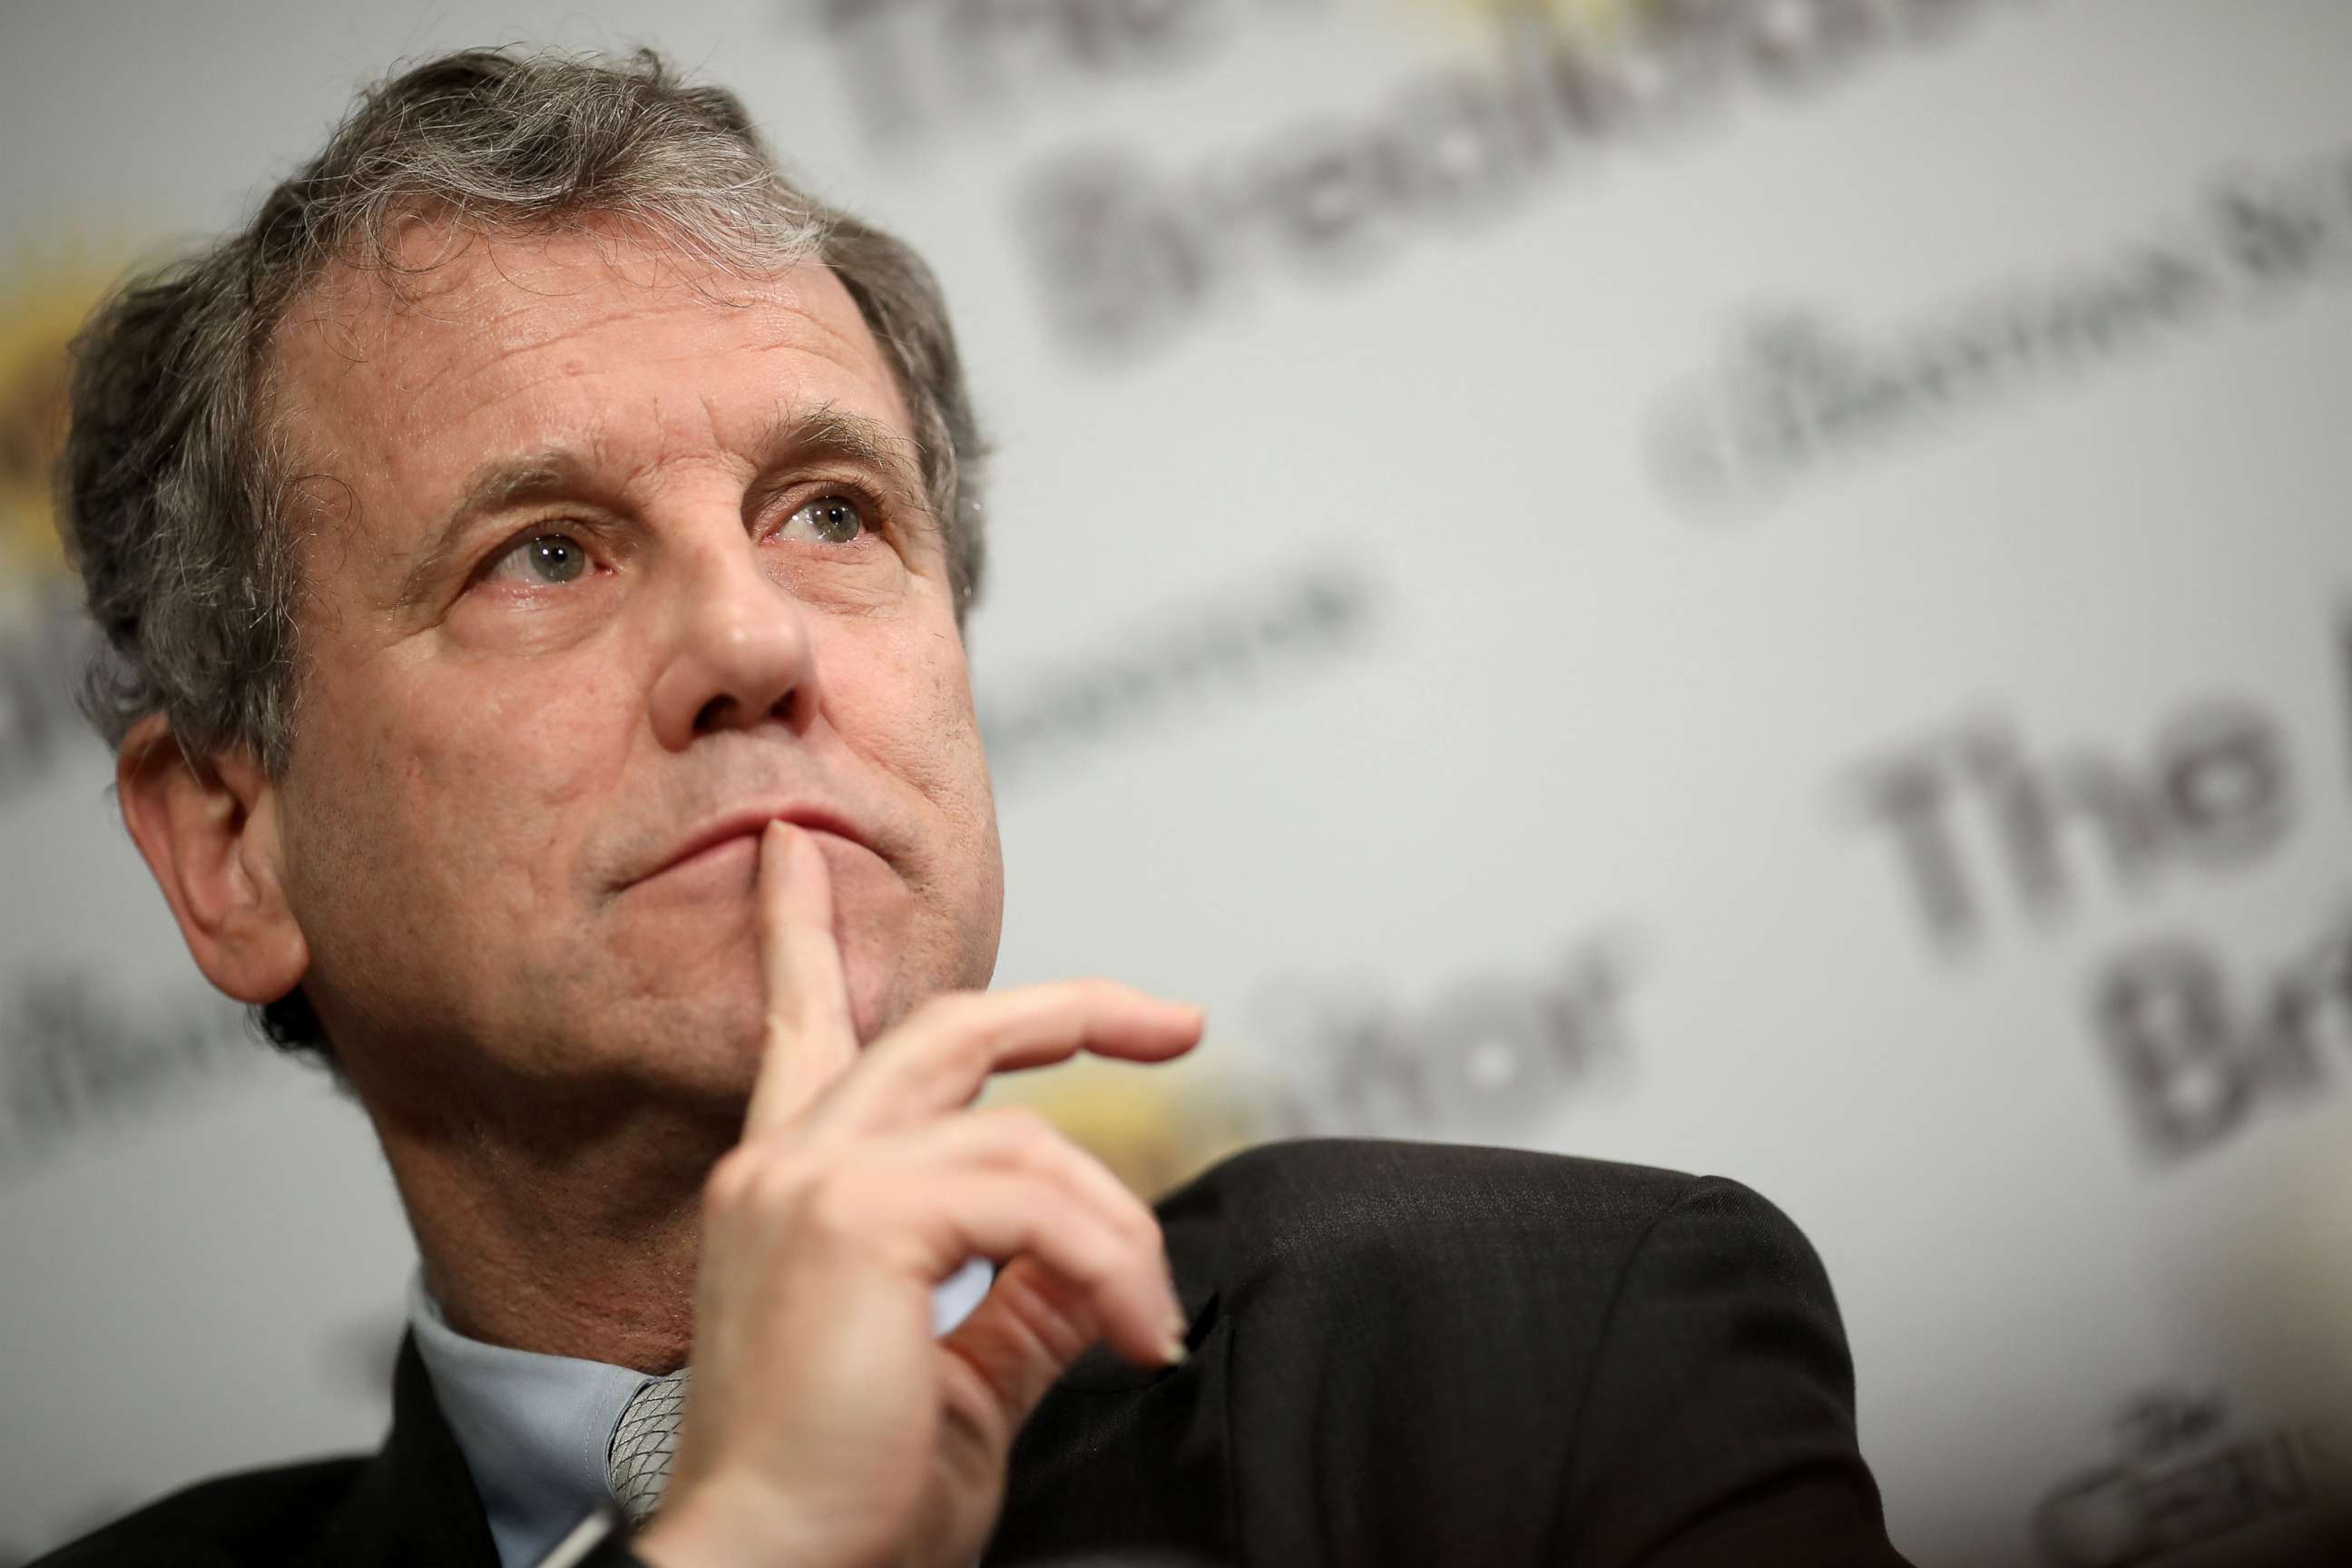 PHOTO: Sen. Sherrod Brown answers questions during a breakfast roundtable, Feb. 12, 2019, in Washington, DC.